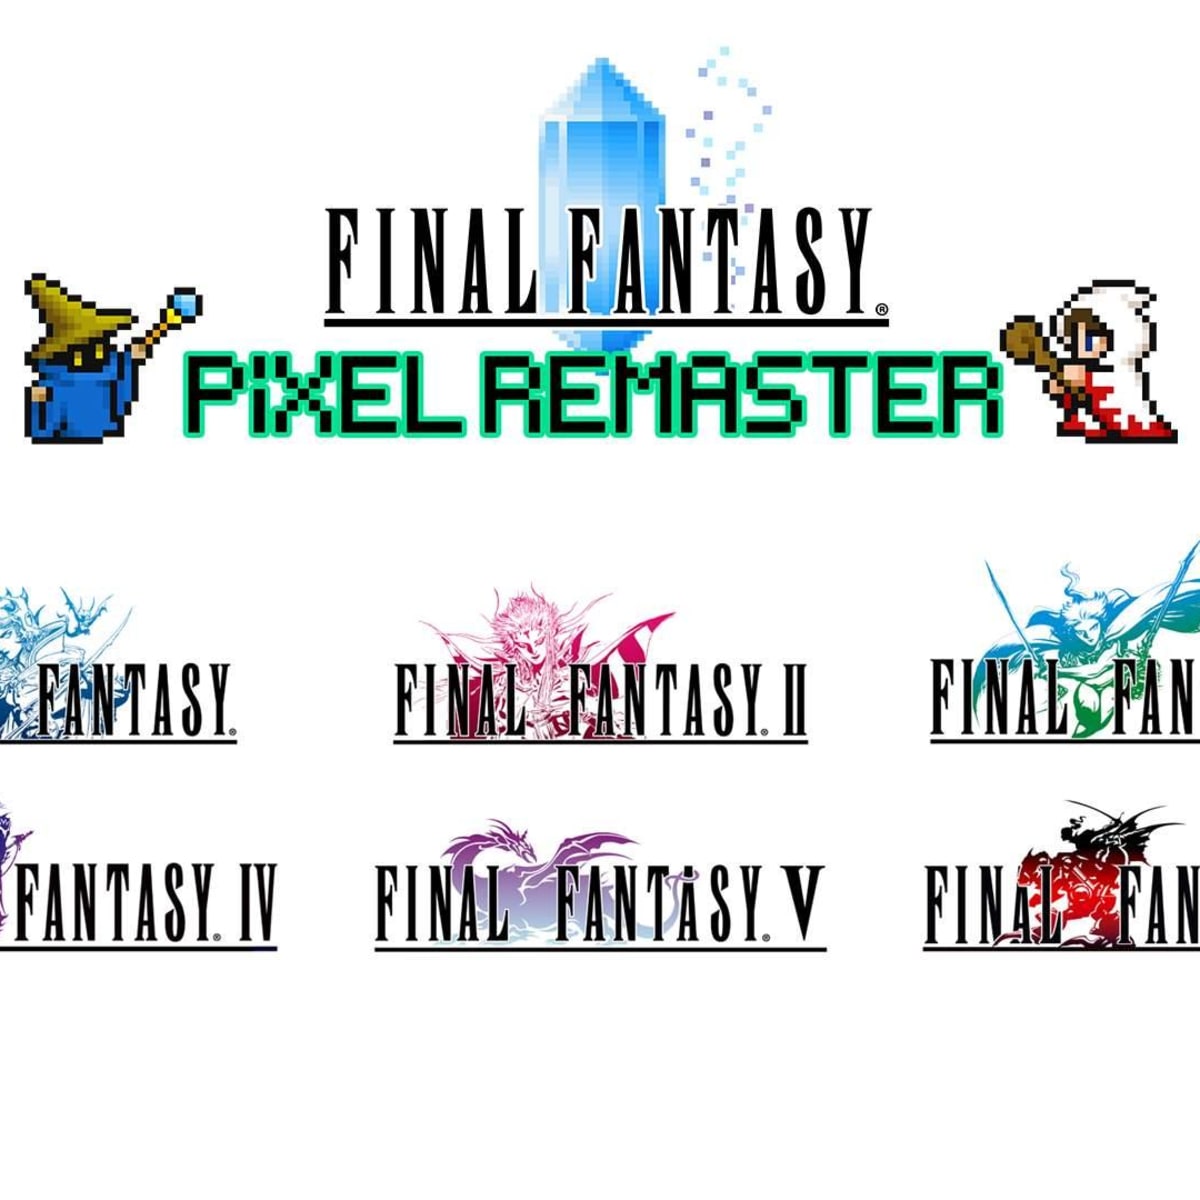 Final Fantasy Pixel Remaster review: the best way to play the